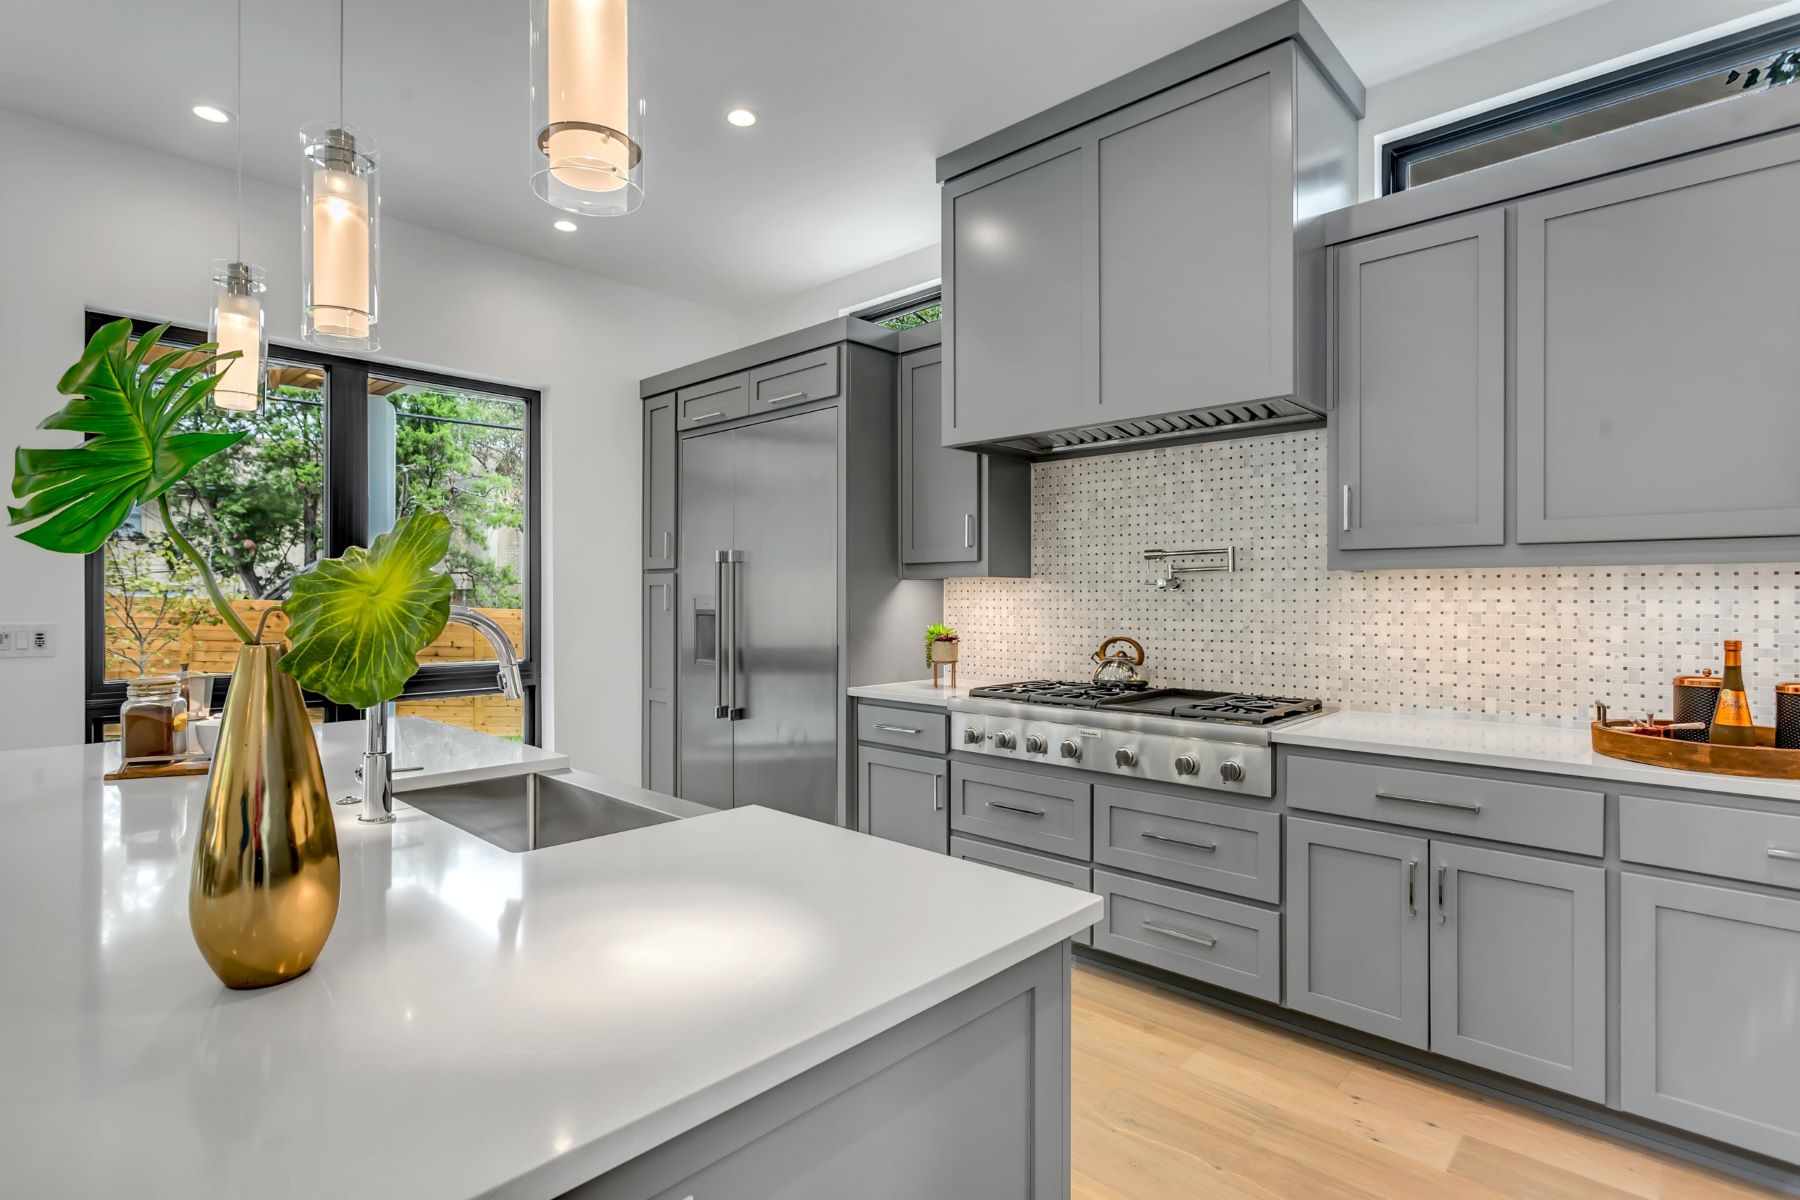 What Color Countertops Go Best With Gray Cabinets